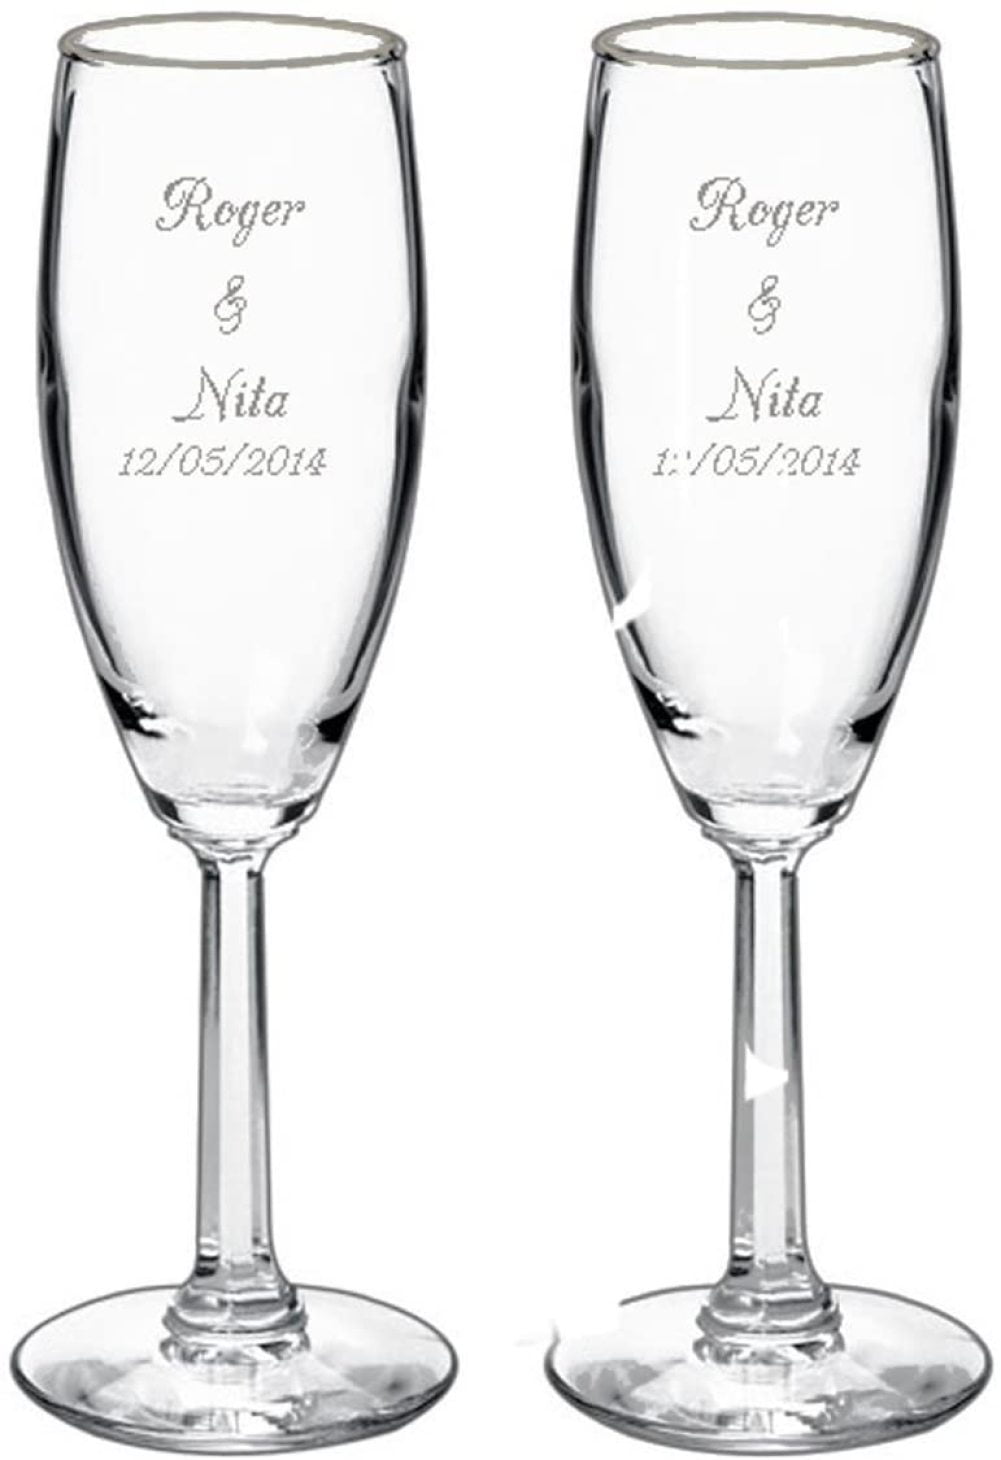 Bells Gifts Infinity Engraved Wedding Stemless Champagne Flutes Set of 2 Personalized Toasting Glasses 